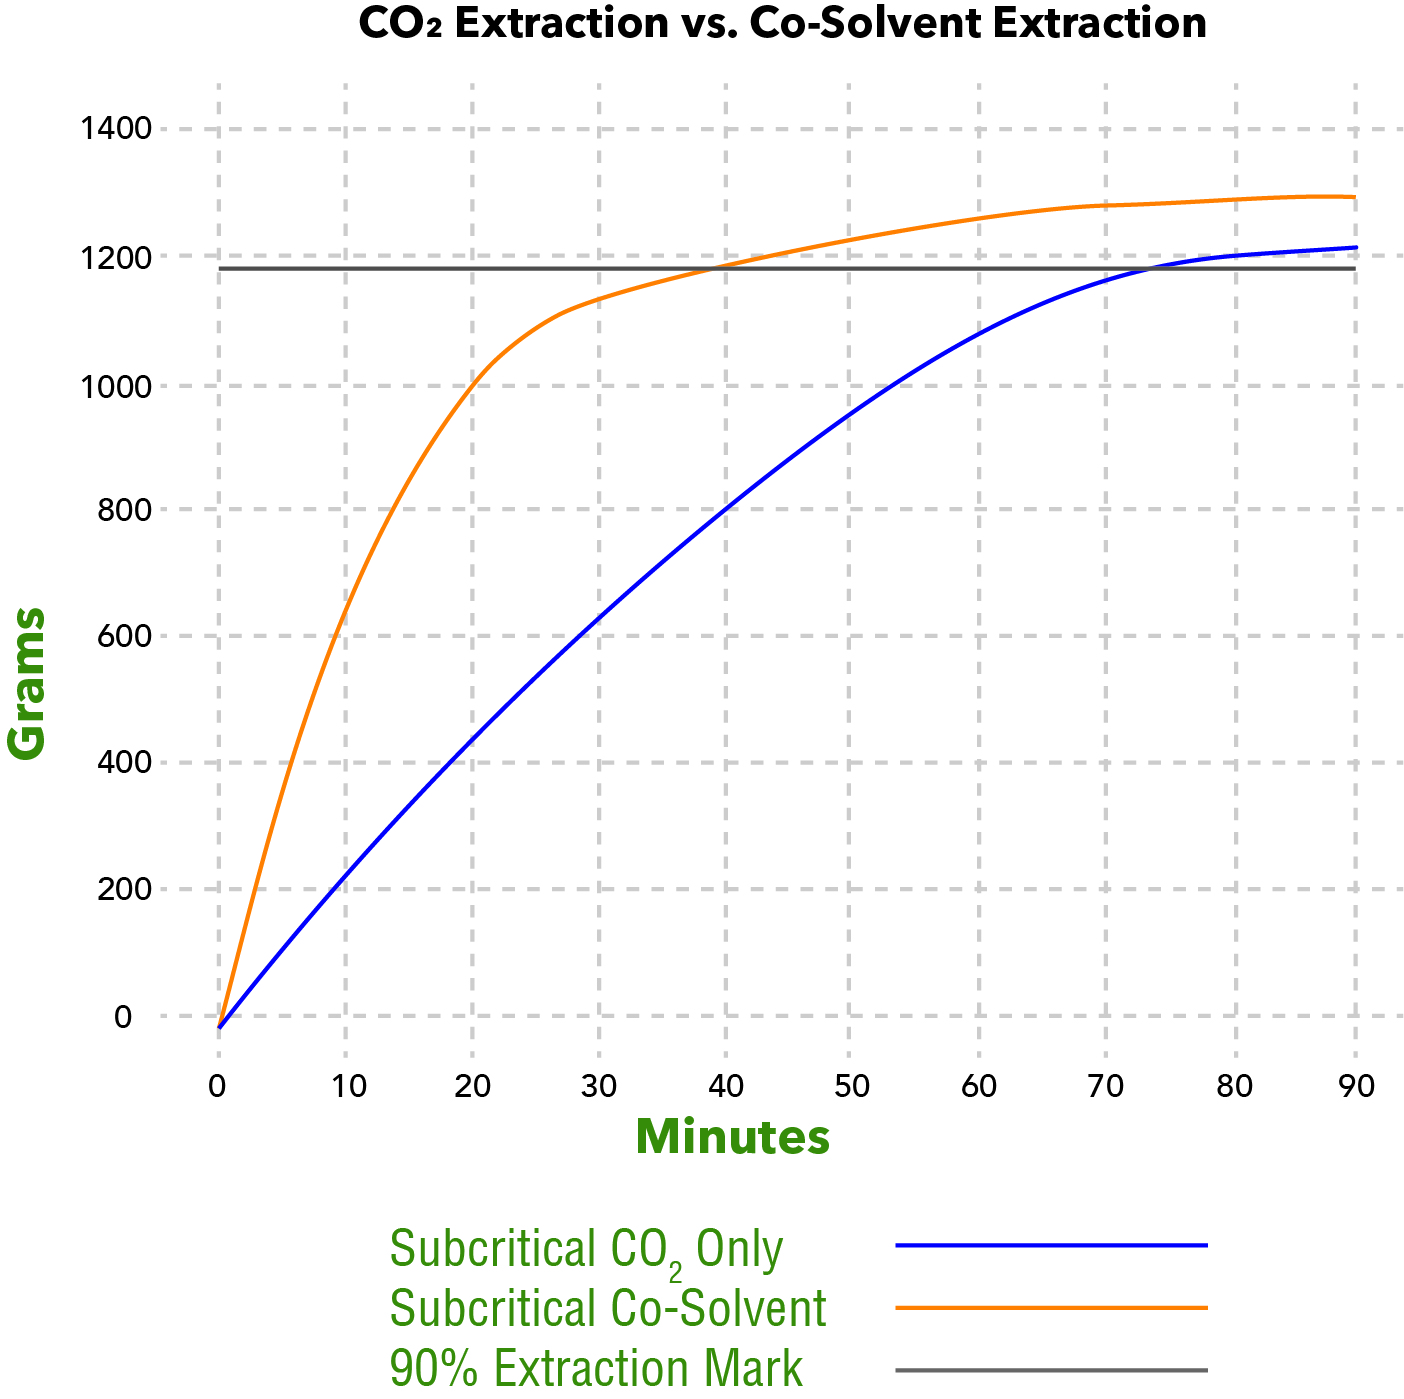 https://campaign-image.com/zohocampaigns/122231000016780804_zc_v32_co2_only_vs_co_solvent.jpg